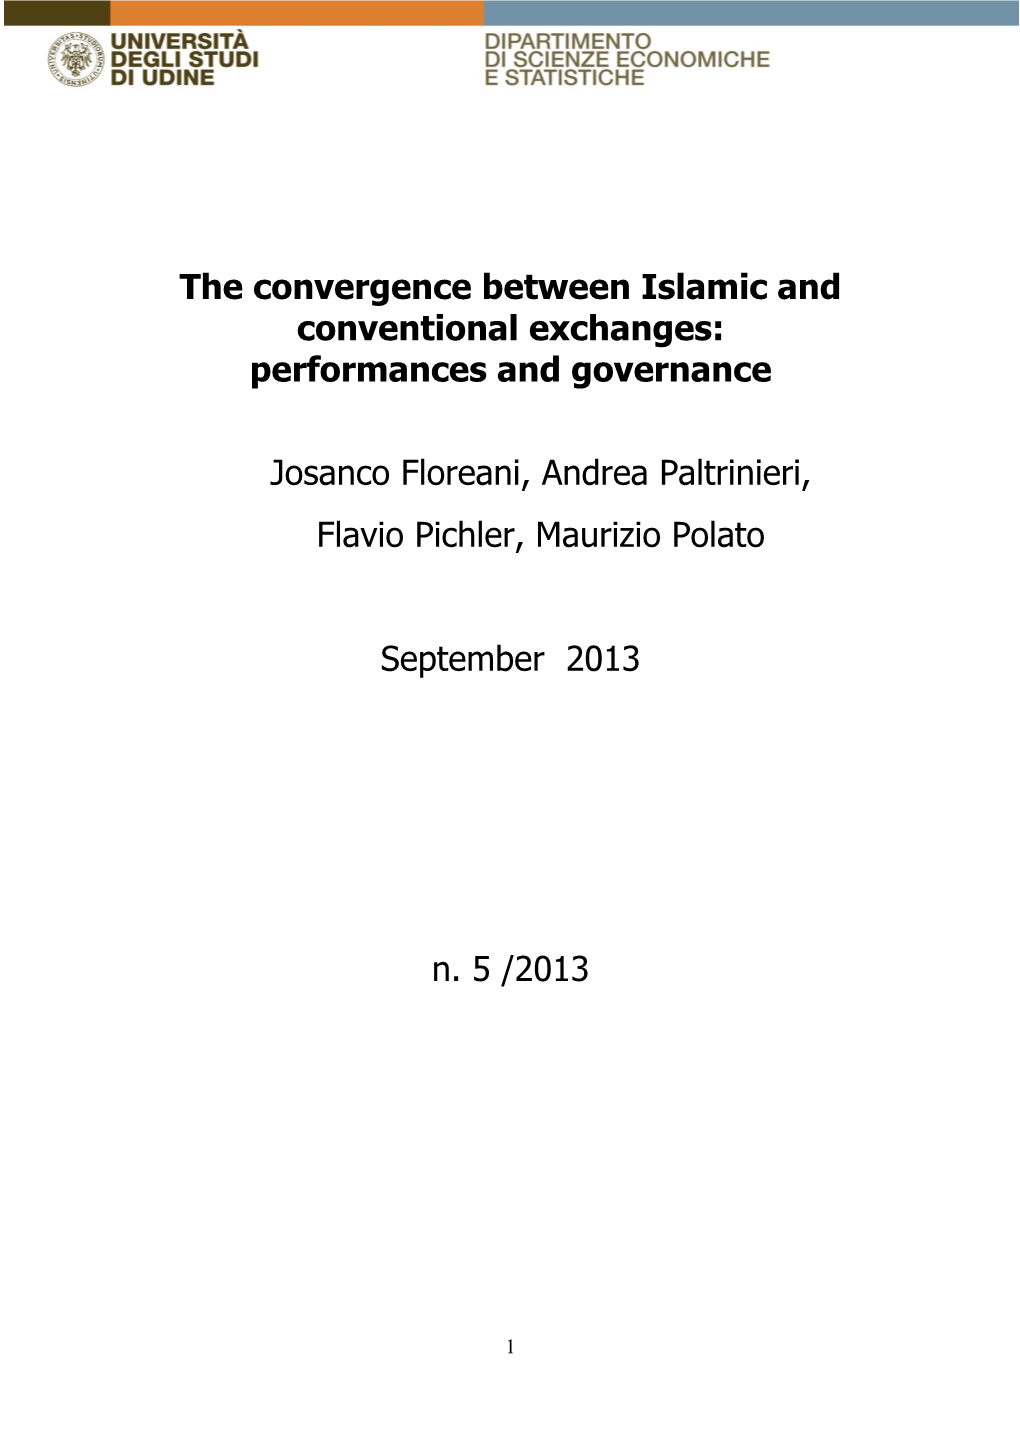 The Convergence Between Islamic and Conventional Exchanges: Performances and Governance